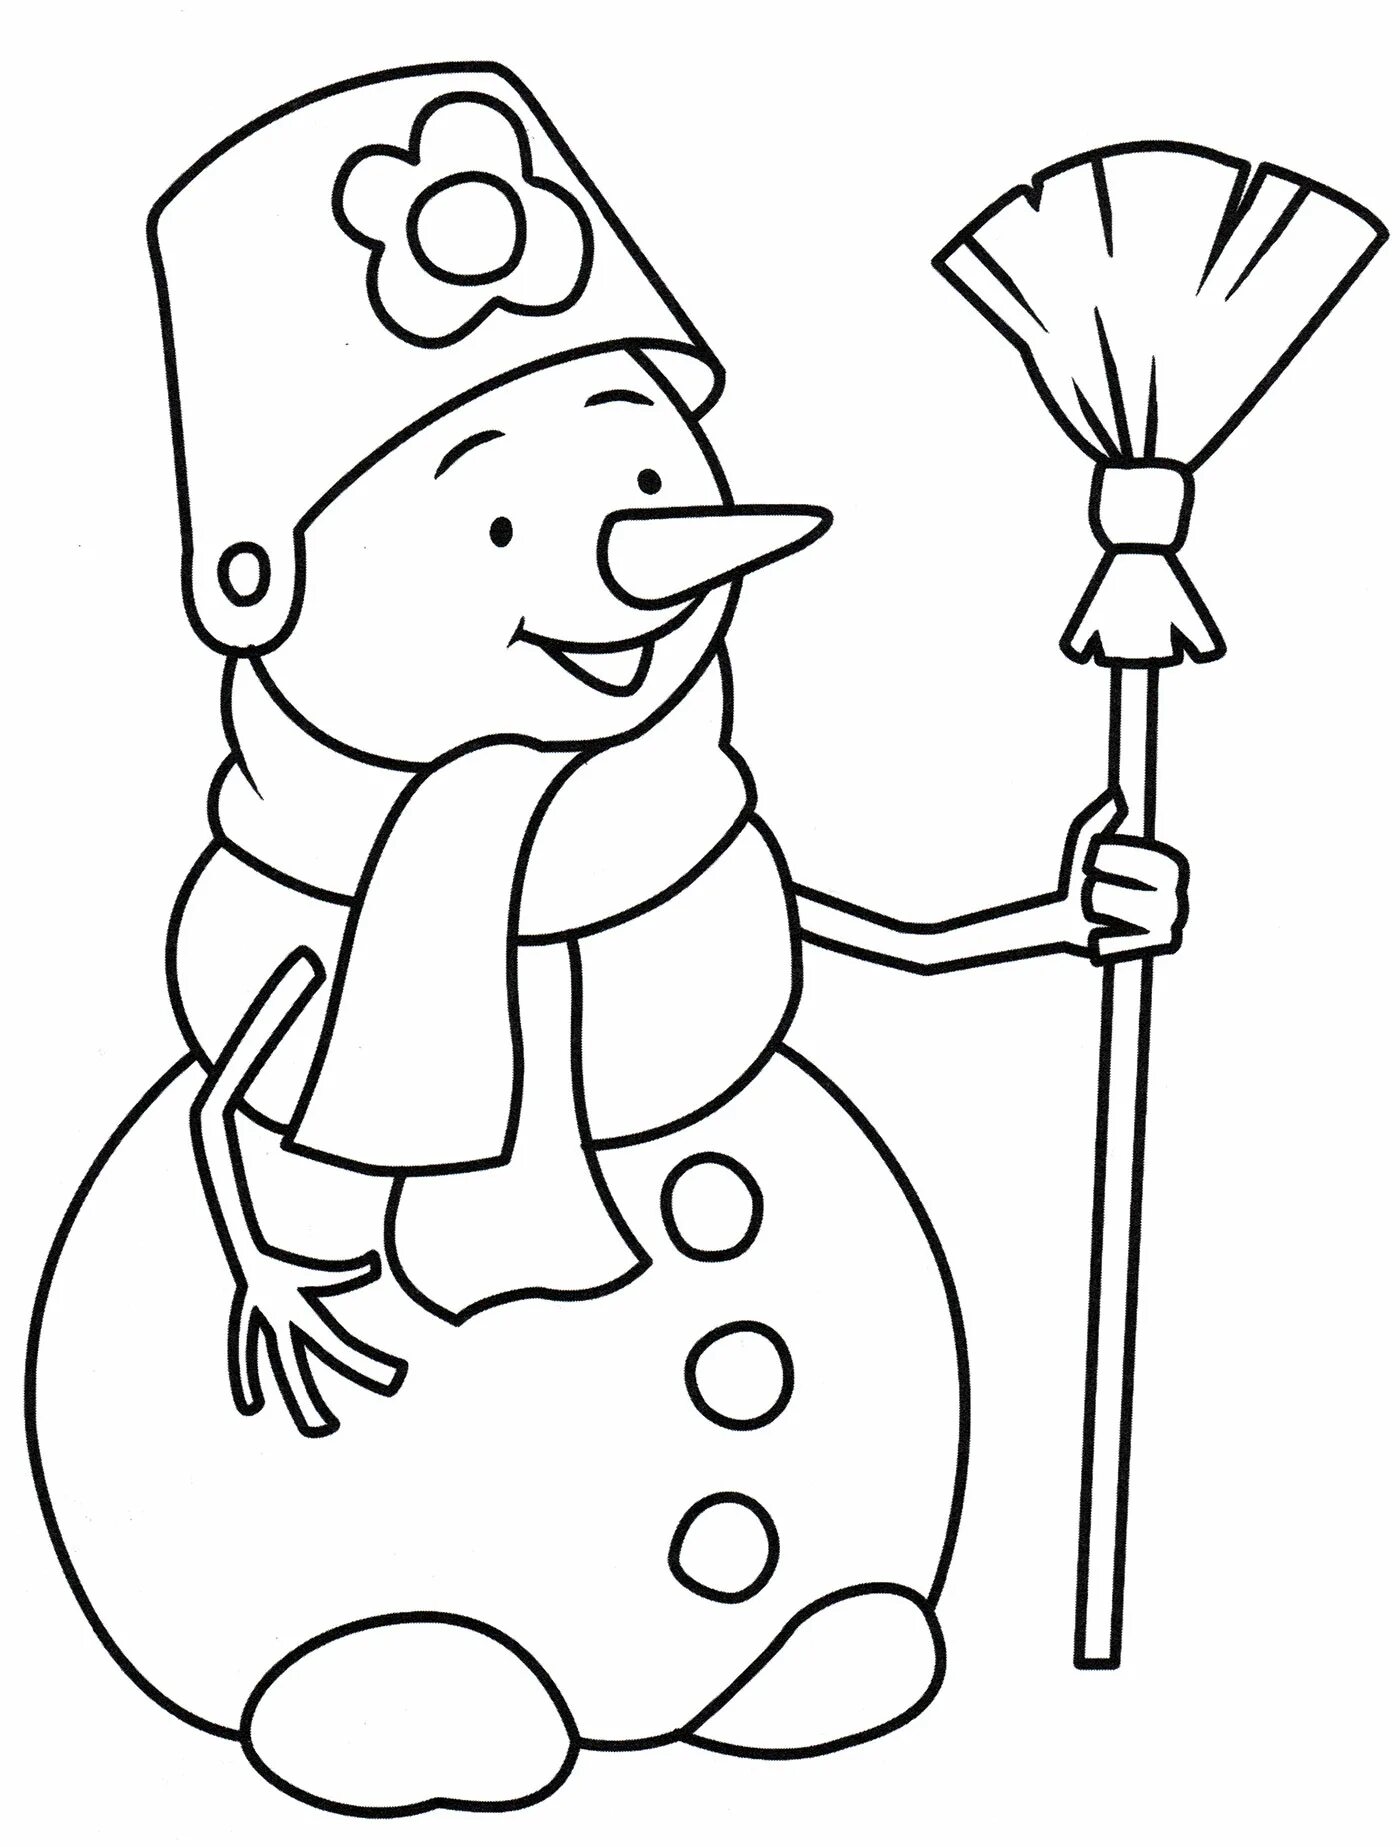 Fantastic coloring book snowman with a broom